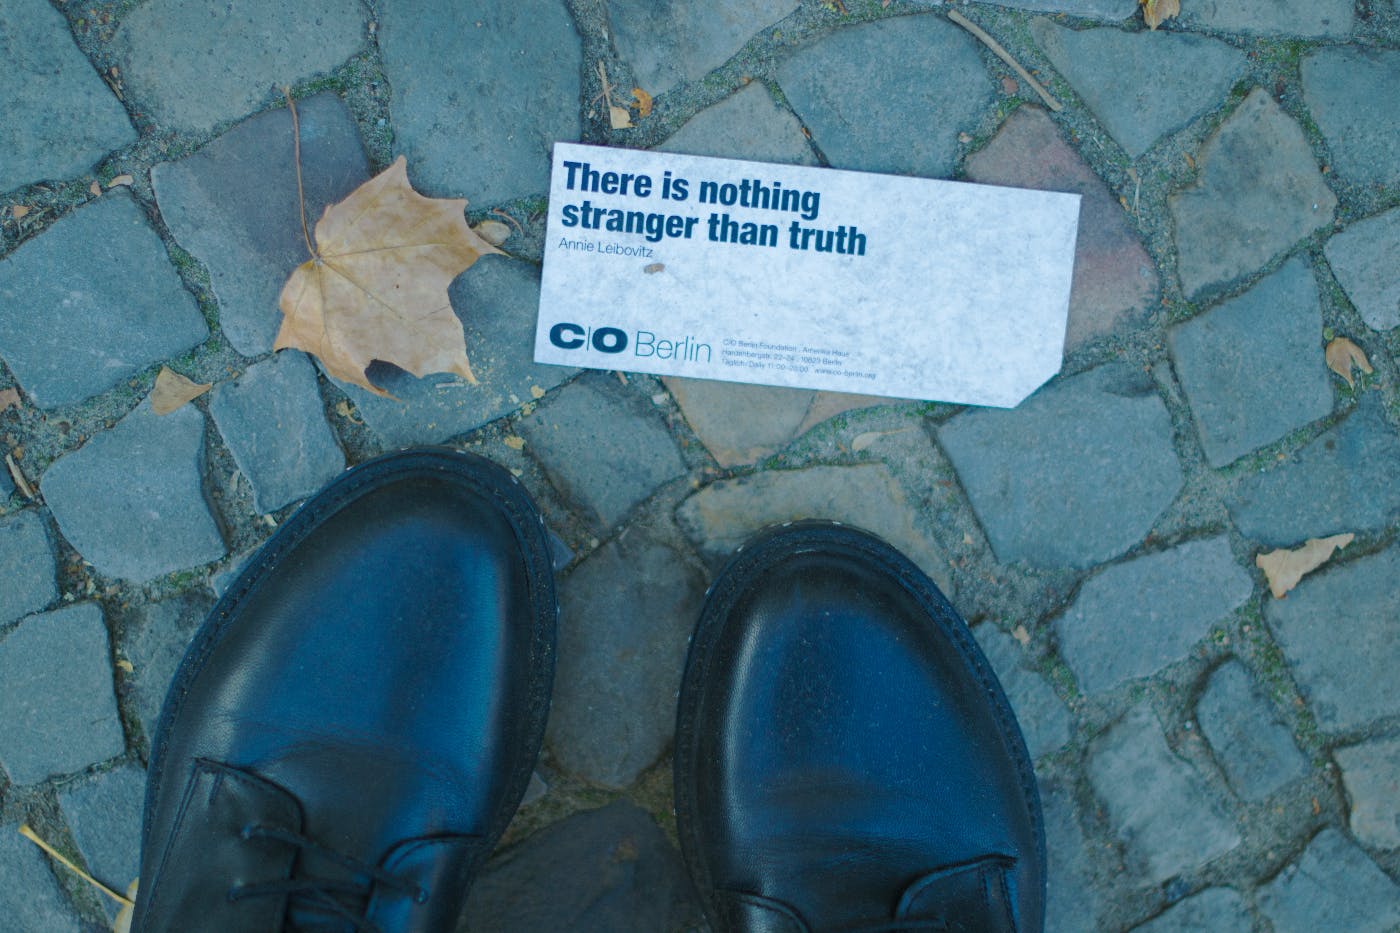 a view from above, a pair of black shoes and a slip of paper with There is nothing stranger than truth printed on it